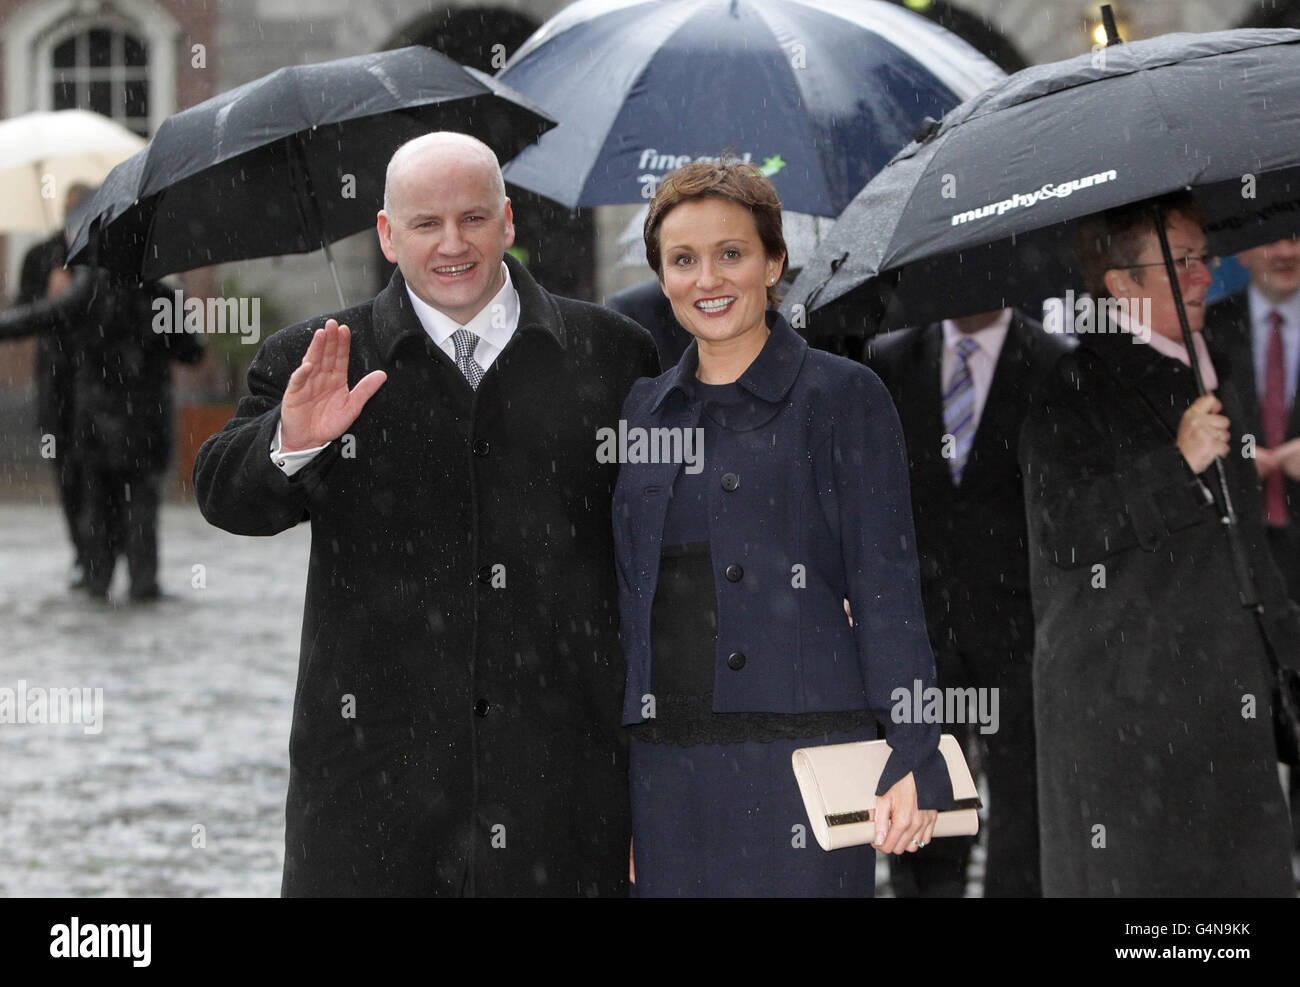 Presidential candidate Sean Gallagher and his wife Trish arrive at Dublin Castle for the inauguration ceremony of President-elect Michael D Higgins as Ireland's ninth head of state today. PRESS ASSOCIATION. Picture date: Friday November 11, 2011. See PA story IRISH President. Photo credit should read: Niall Carson/PA Wire Stock Photo